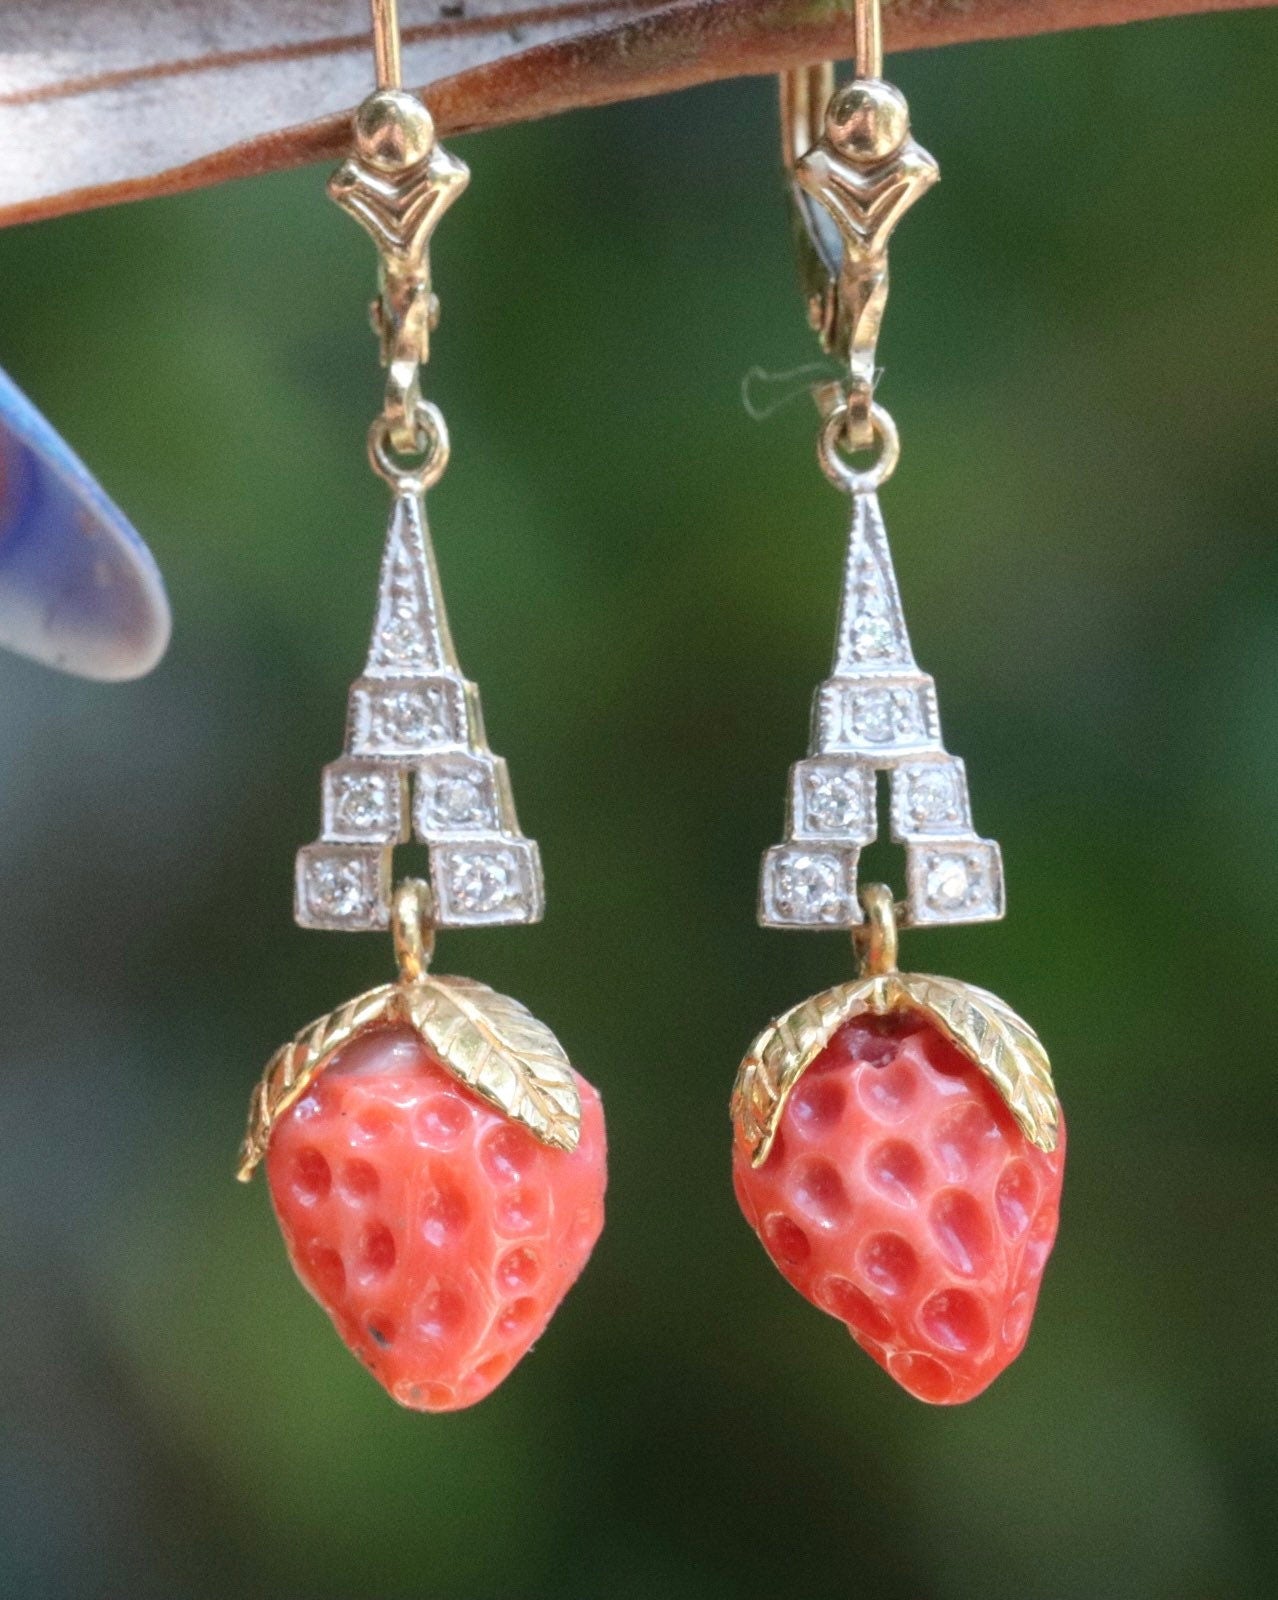 Genuine Art Deco carved coral strawberry earrings in 9k gold